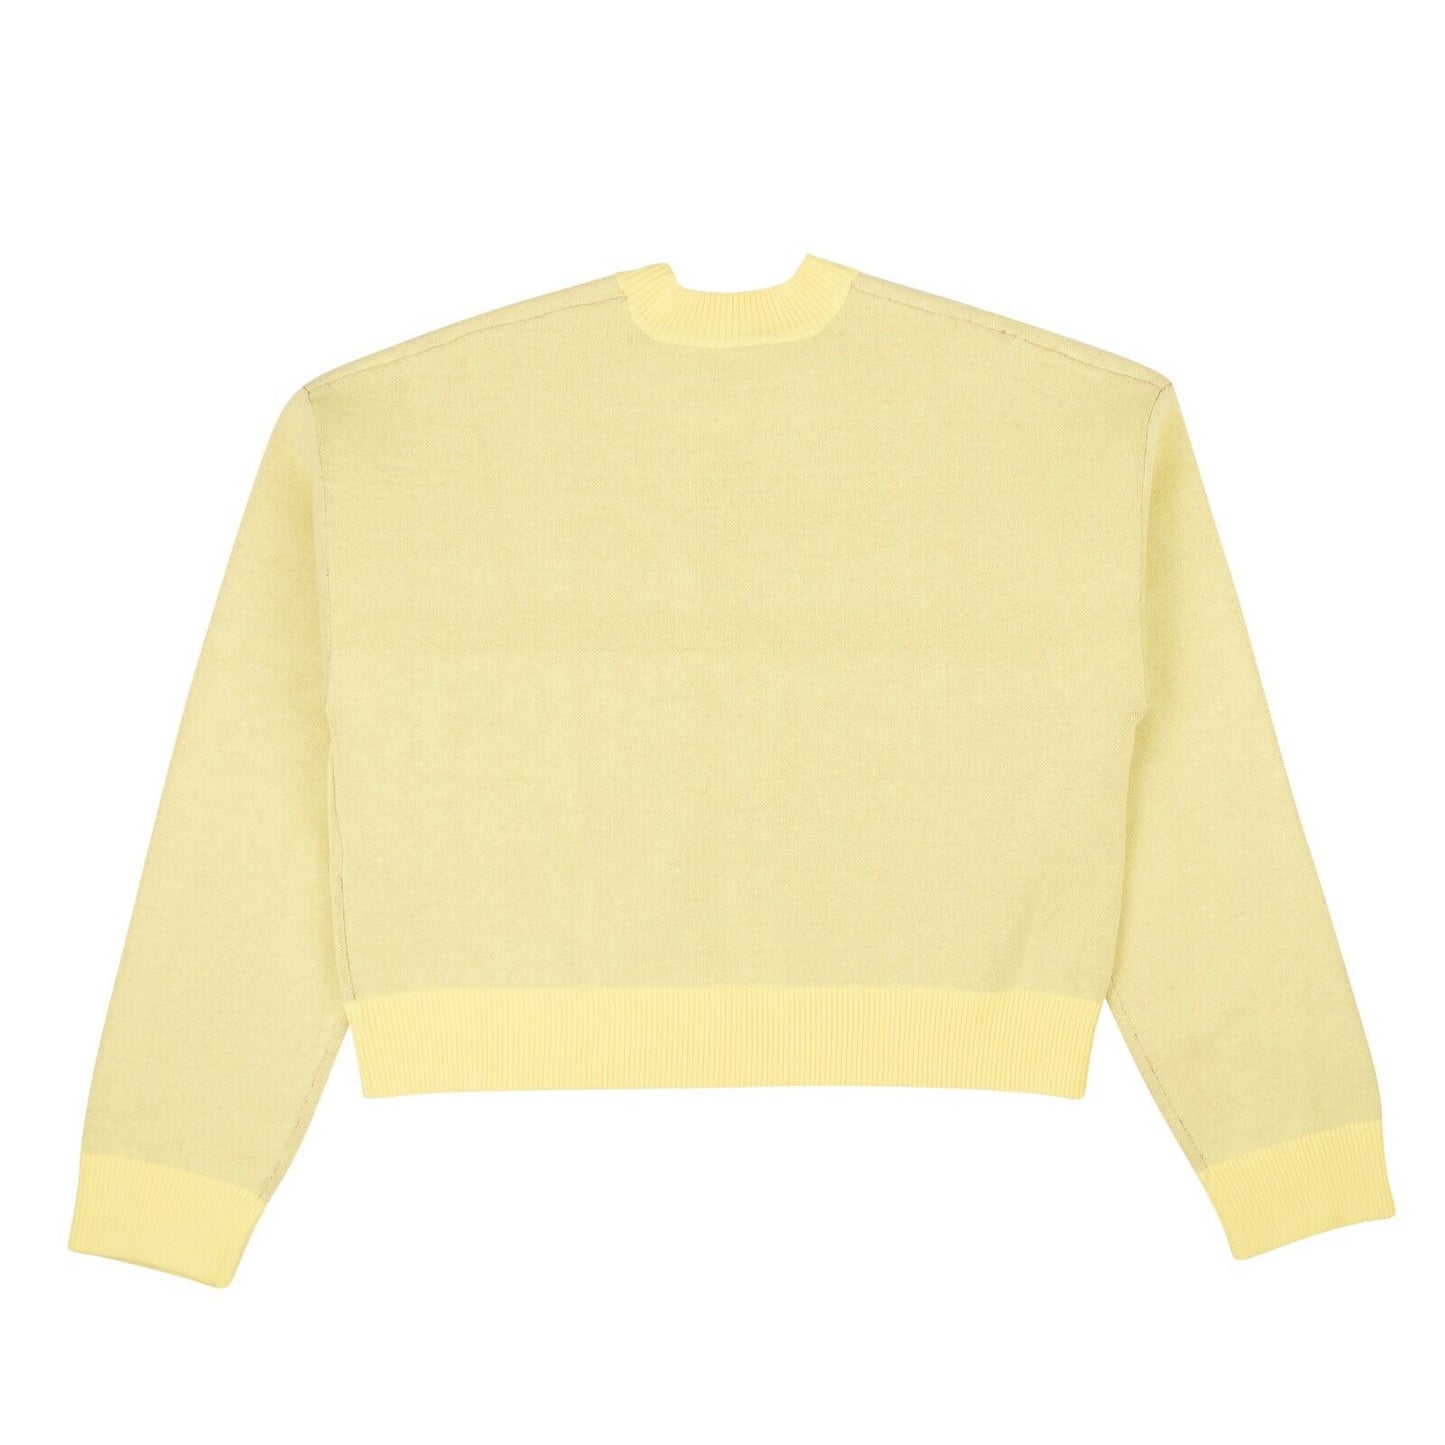 Opening Ceremony Cropped Oc Flower Logo Sweater - Yellow